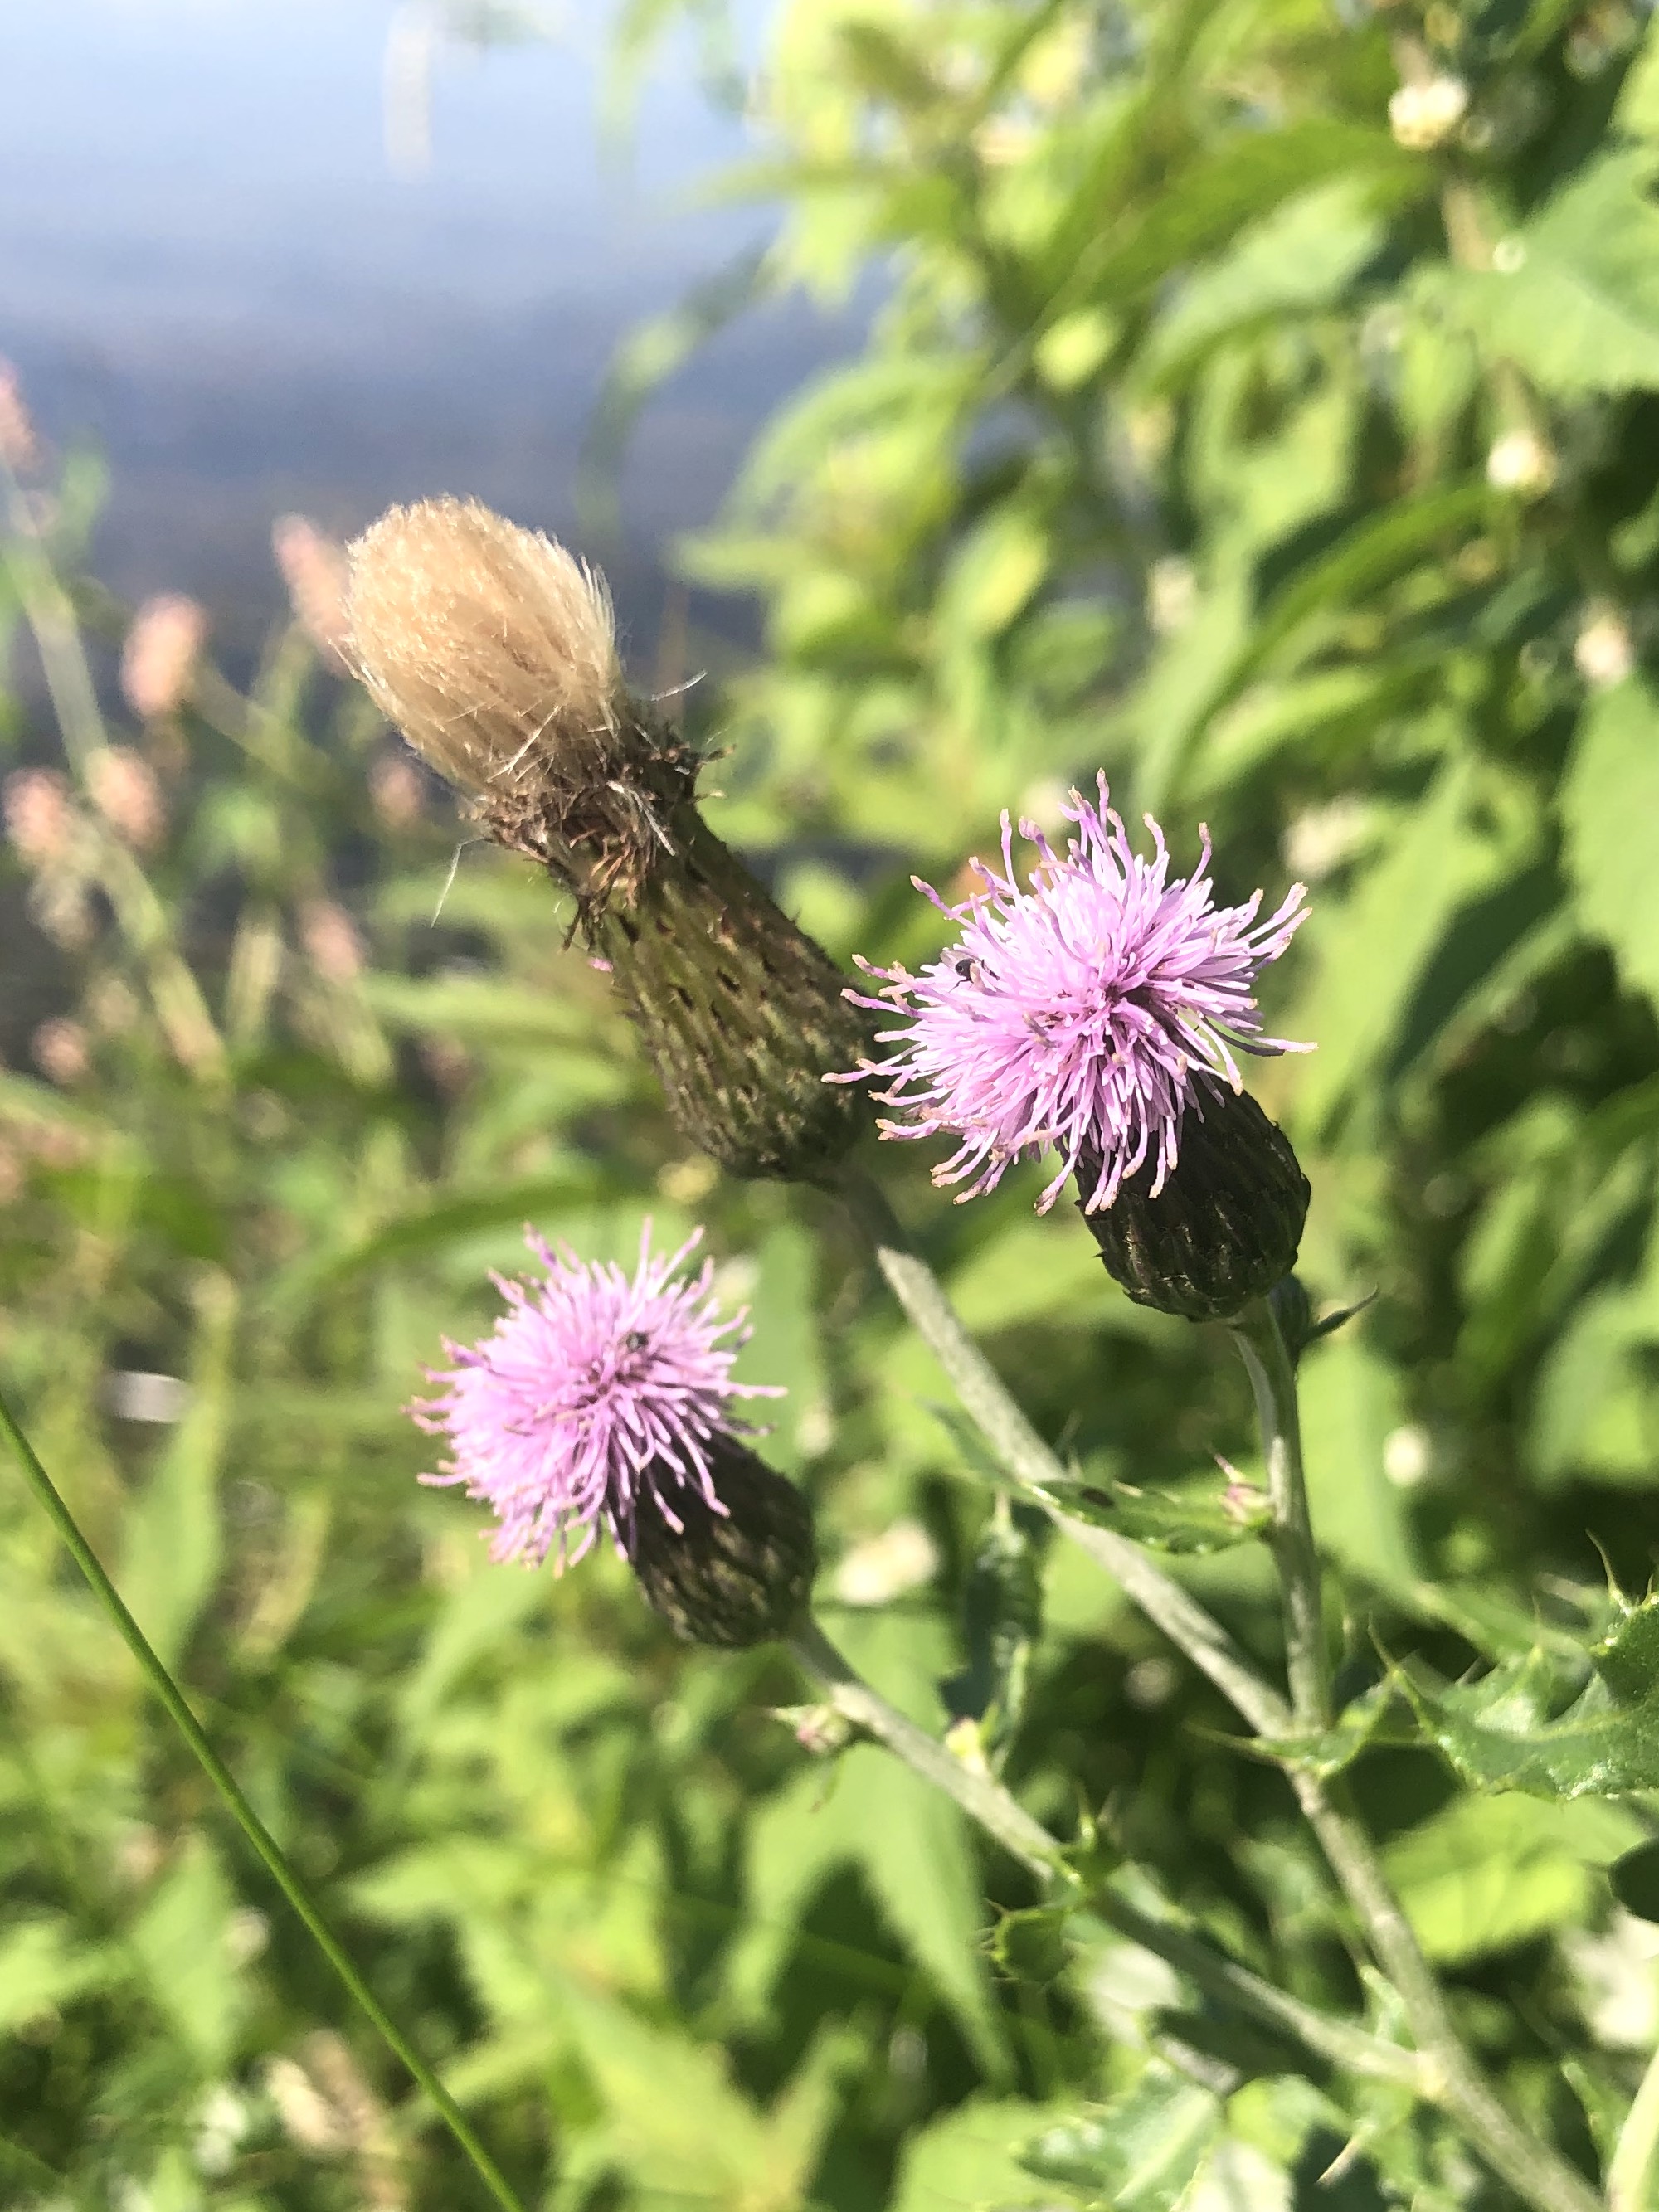 Canada Thistle on the shore of Lake Wingra in Vilas Park in Madison, Wisconsin on August 26, 2022.